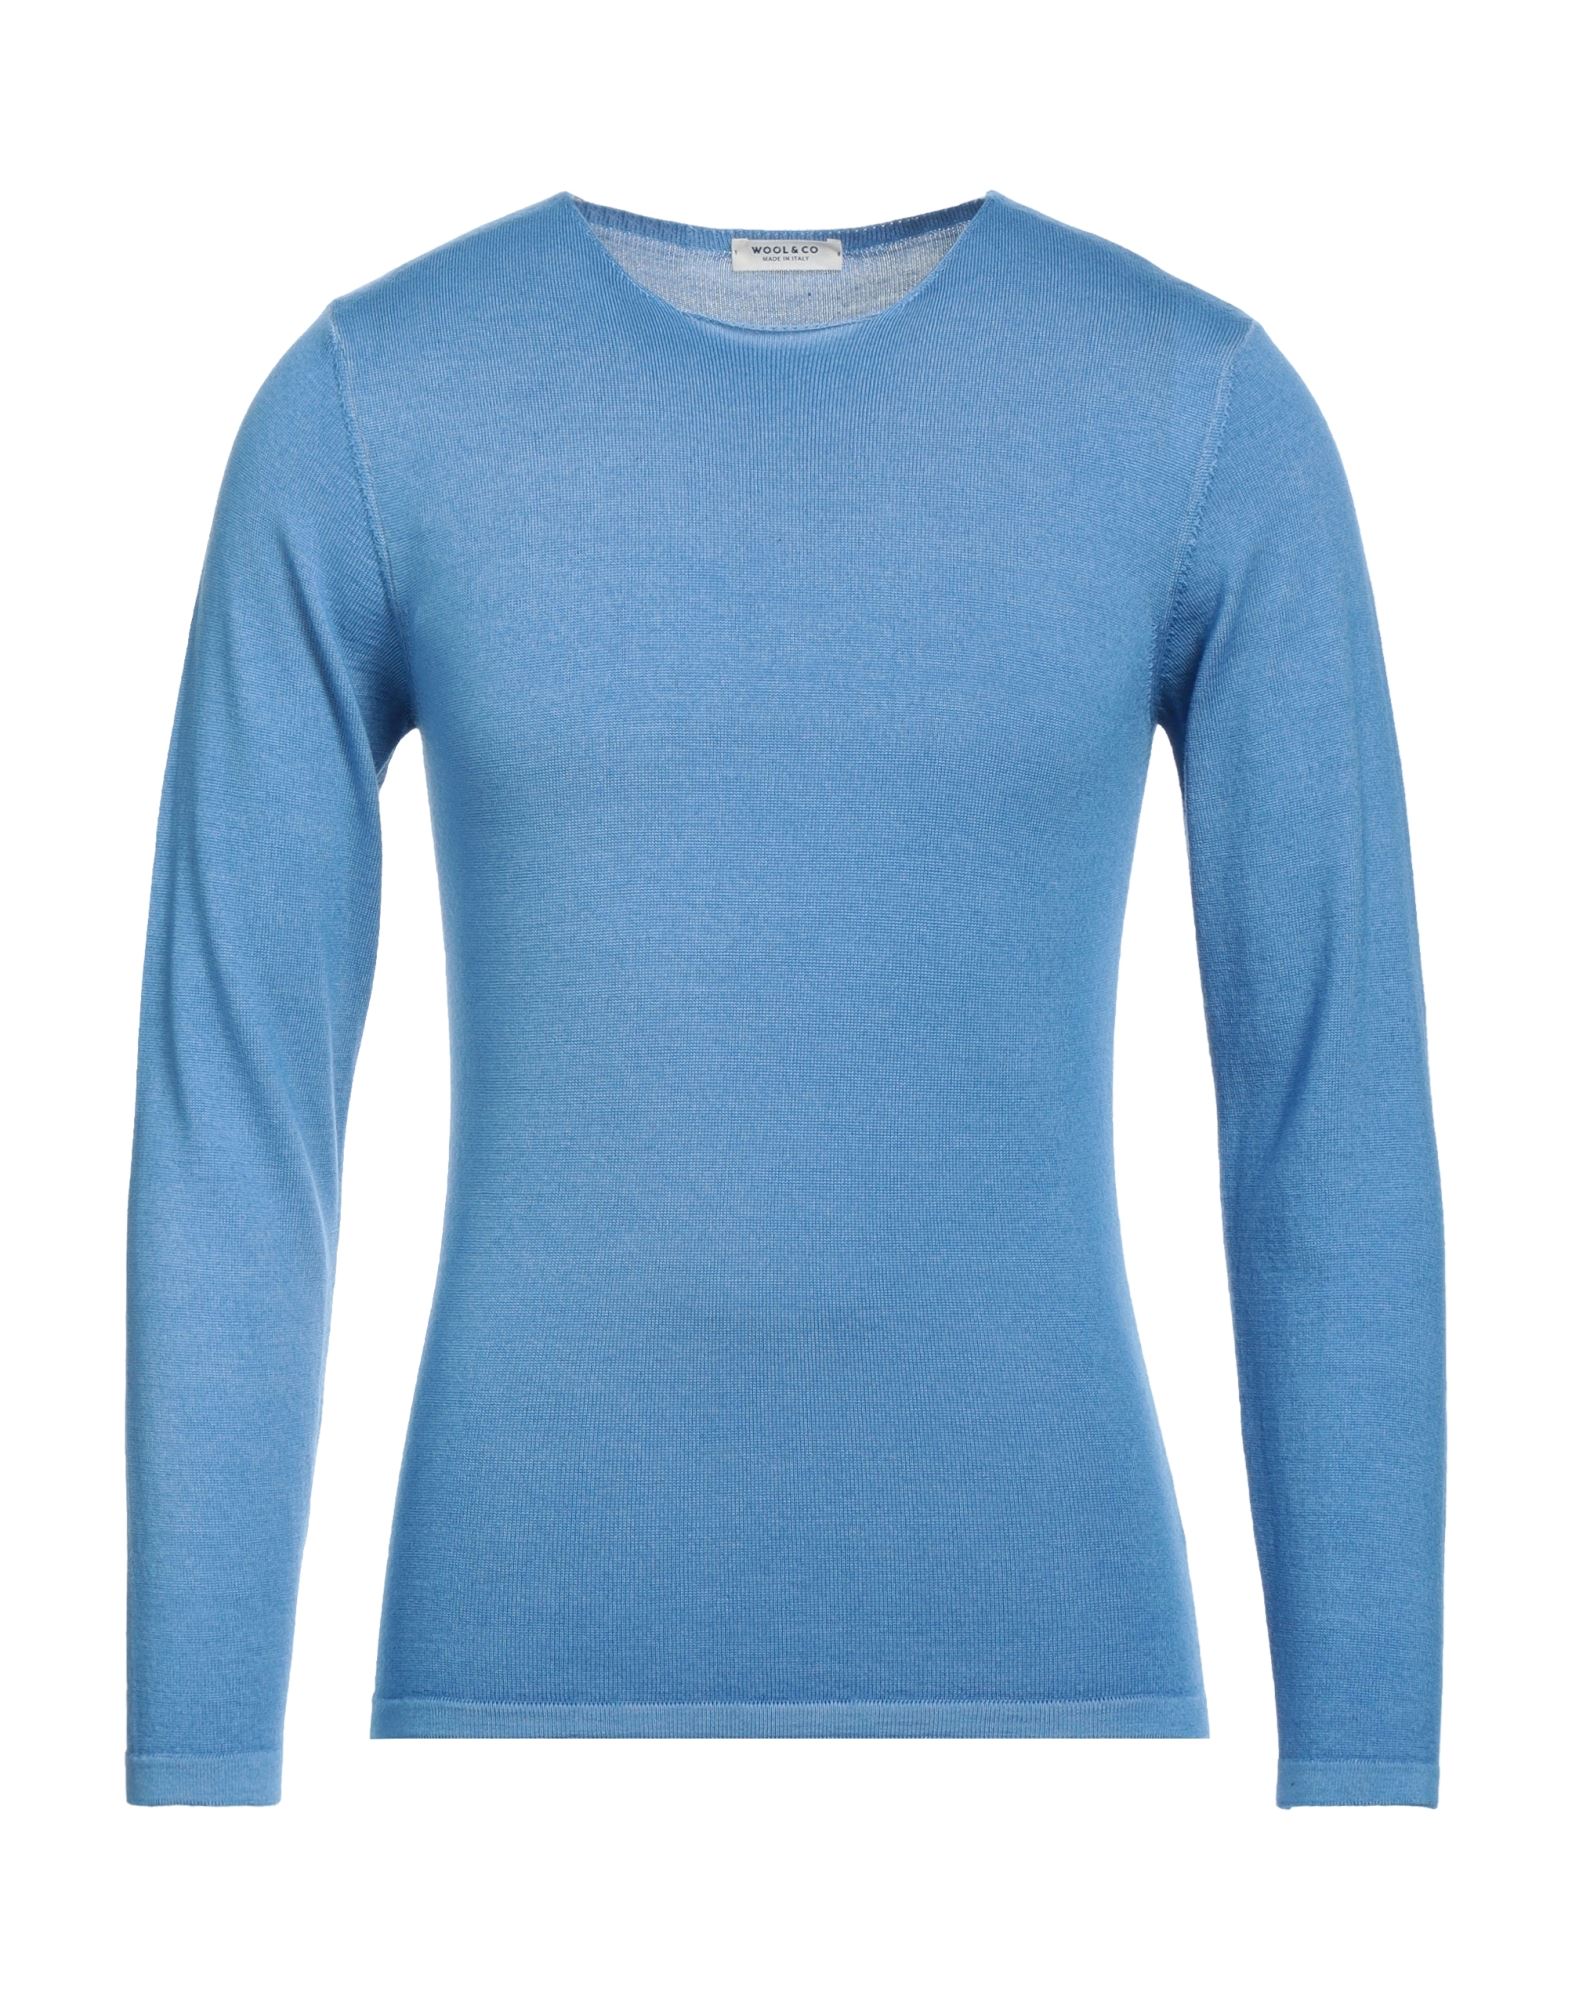 Wool & Co Sweaters In Bright Blue